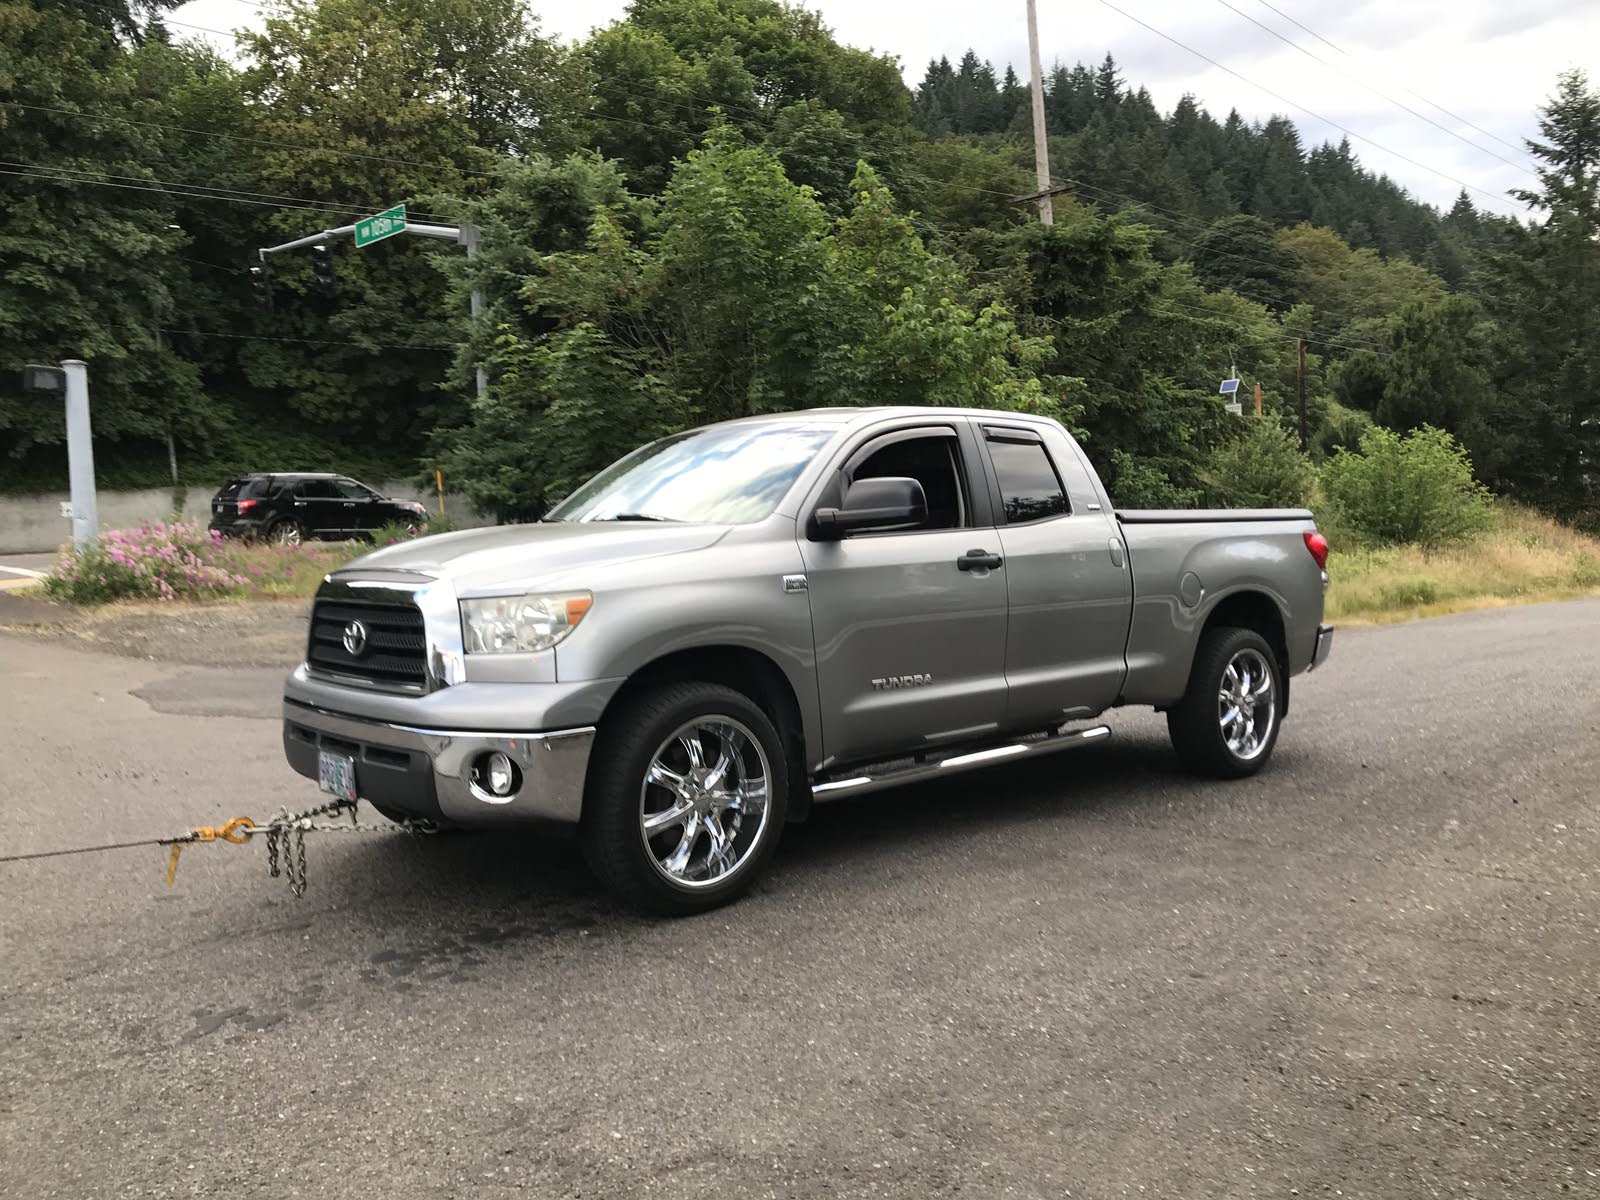 Toyota Tundra Questions - 07 Toyota Tundra died while at a stop light and  won't start now it's f... - CarGurus